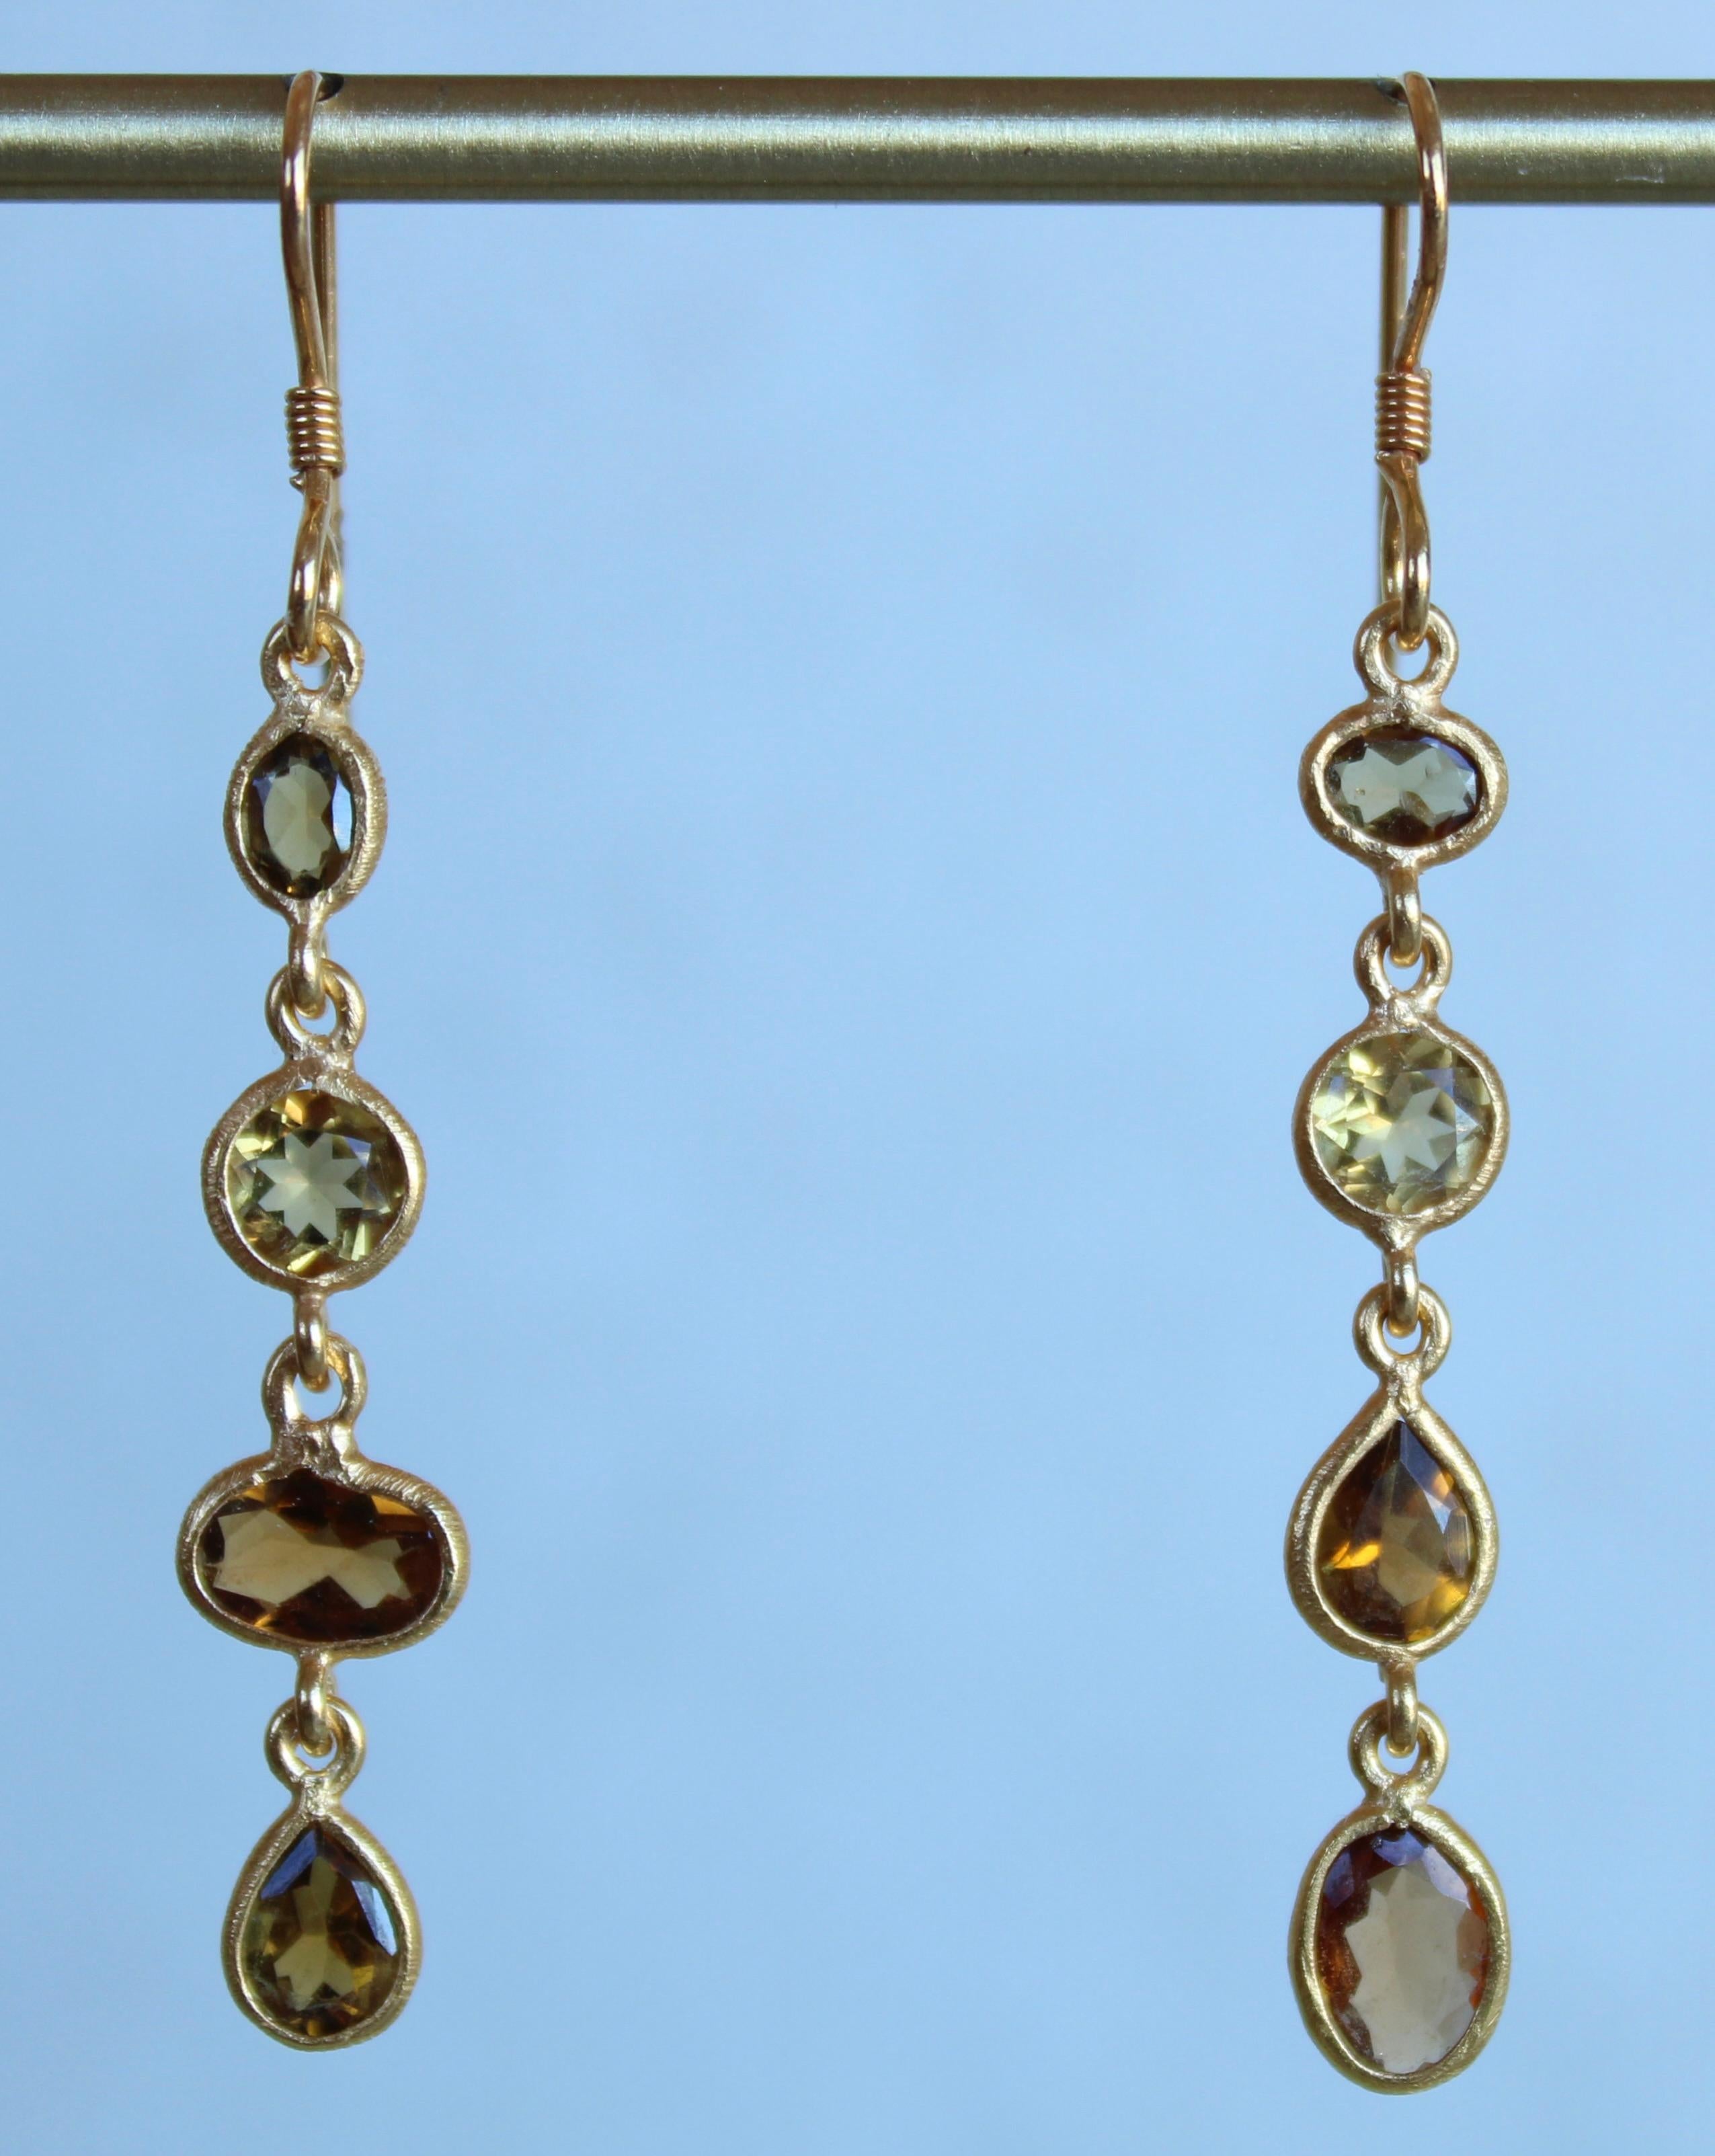 Beautifully appointed and designed four stone dangle earrings comprised of Citrine and Tourmaline. These earrings are meant to be worn as a pair or as a single on either ear. As shown, these dangle earrings are set in 14 karat gold plating with a 14